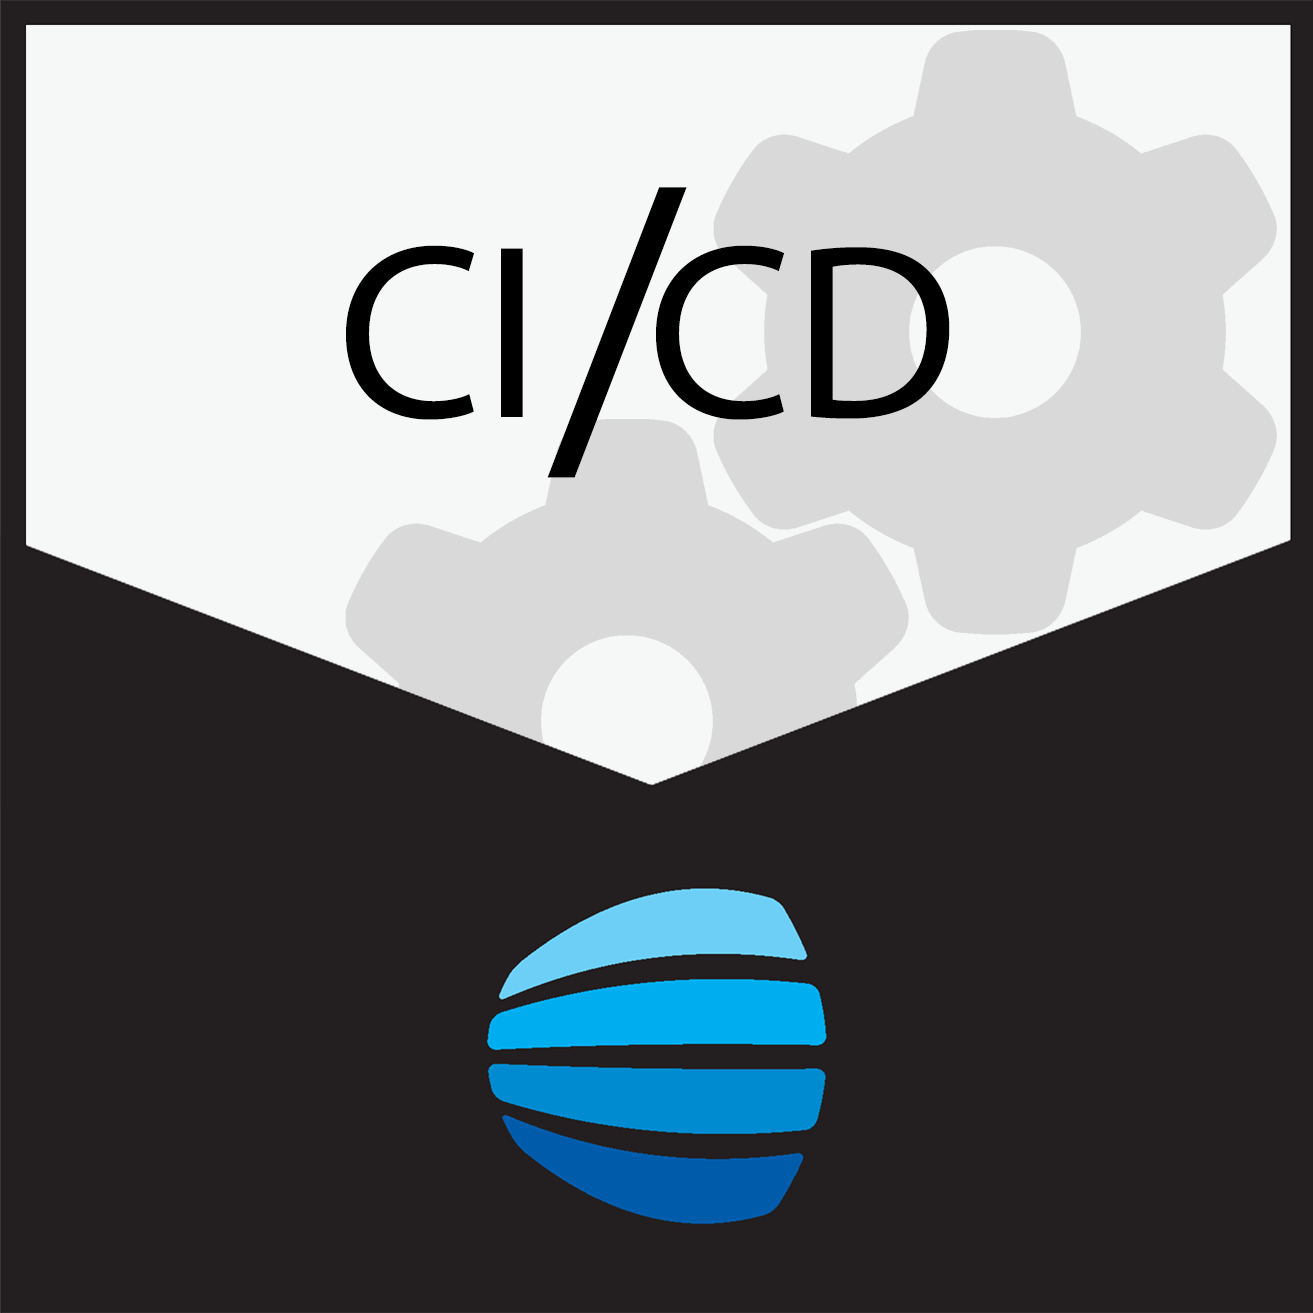 cicd-professional-services@0.5x